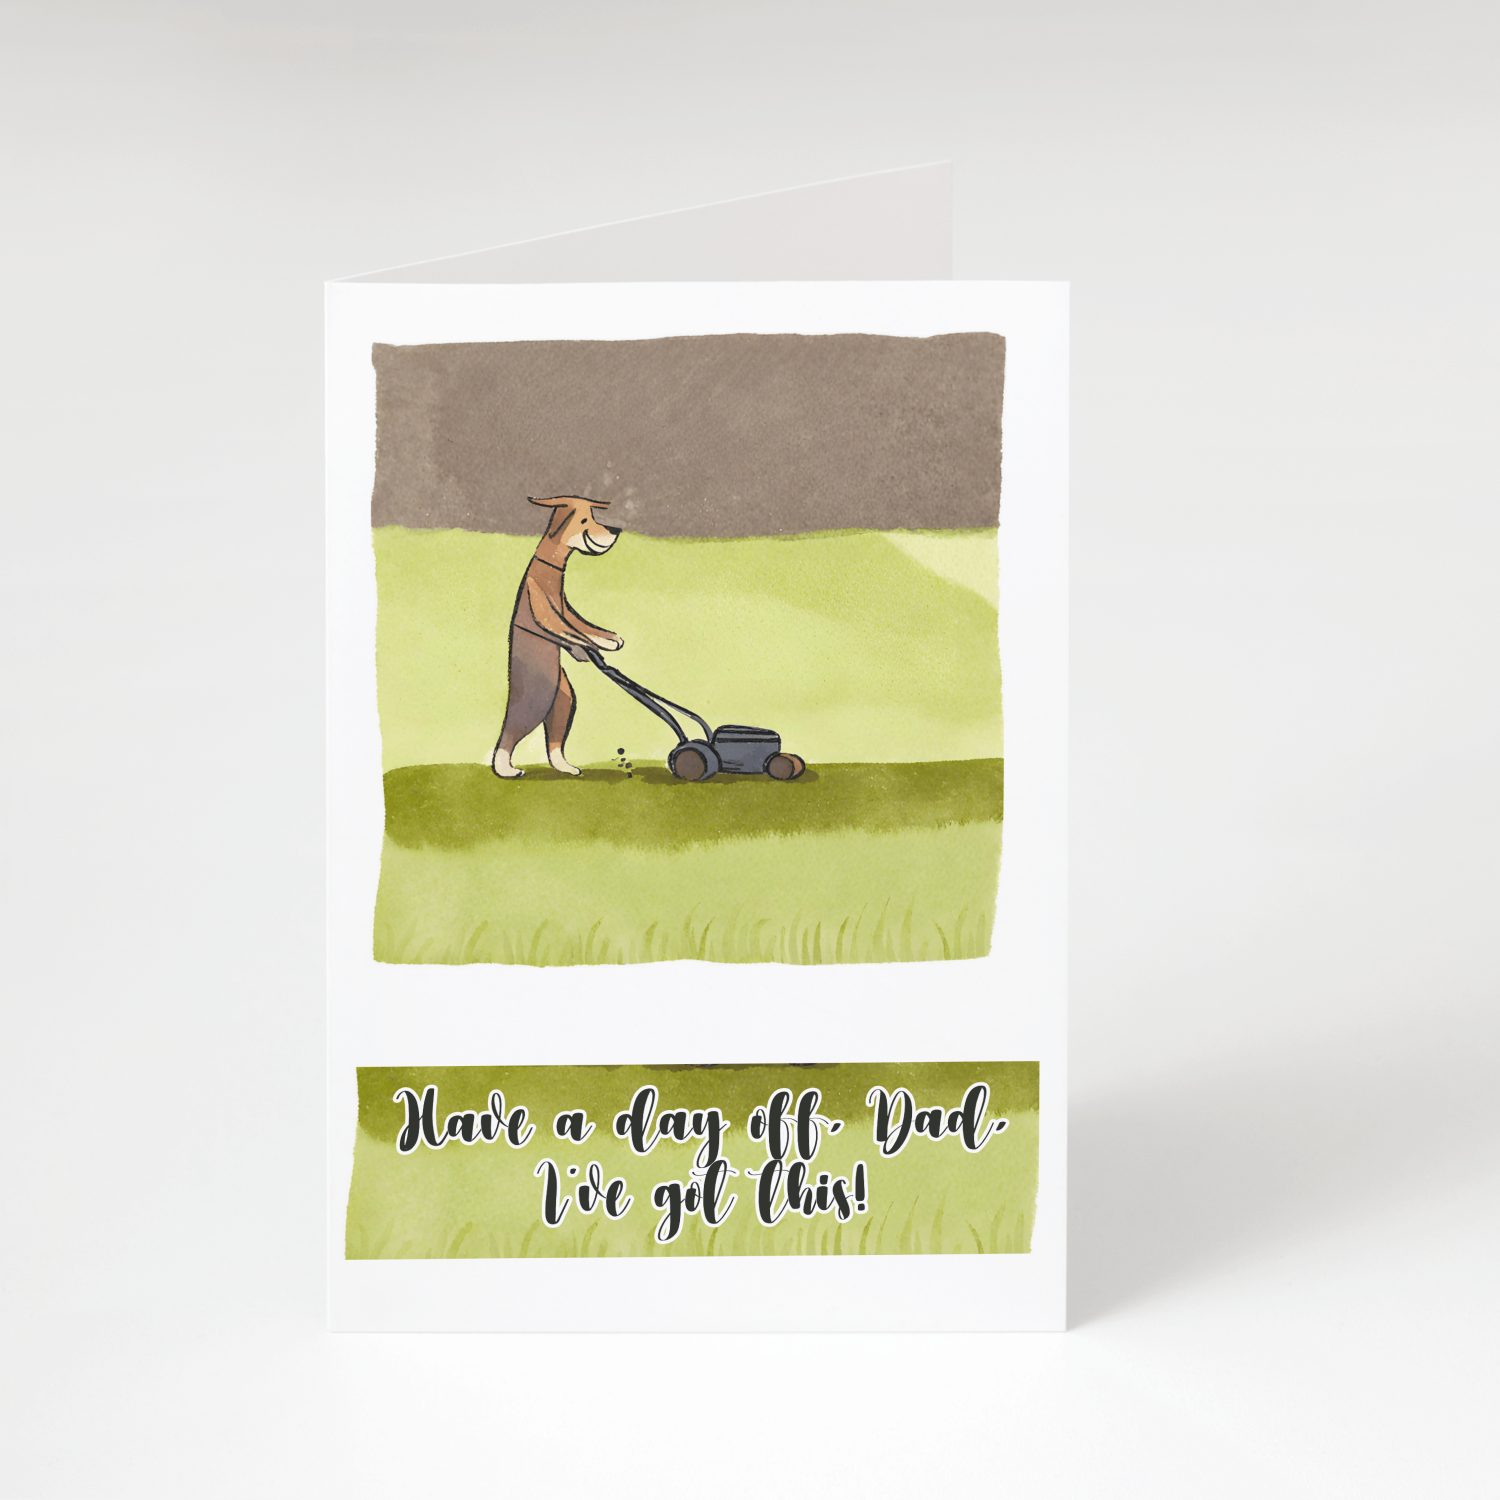 'I've Got This!' Father's Day Greetings Card - A6 - 4.1" x 5.8"